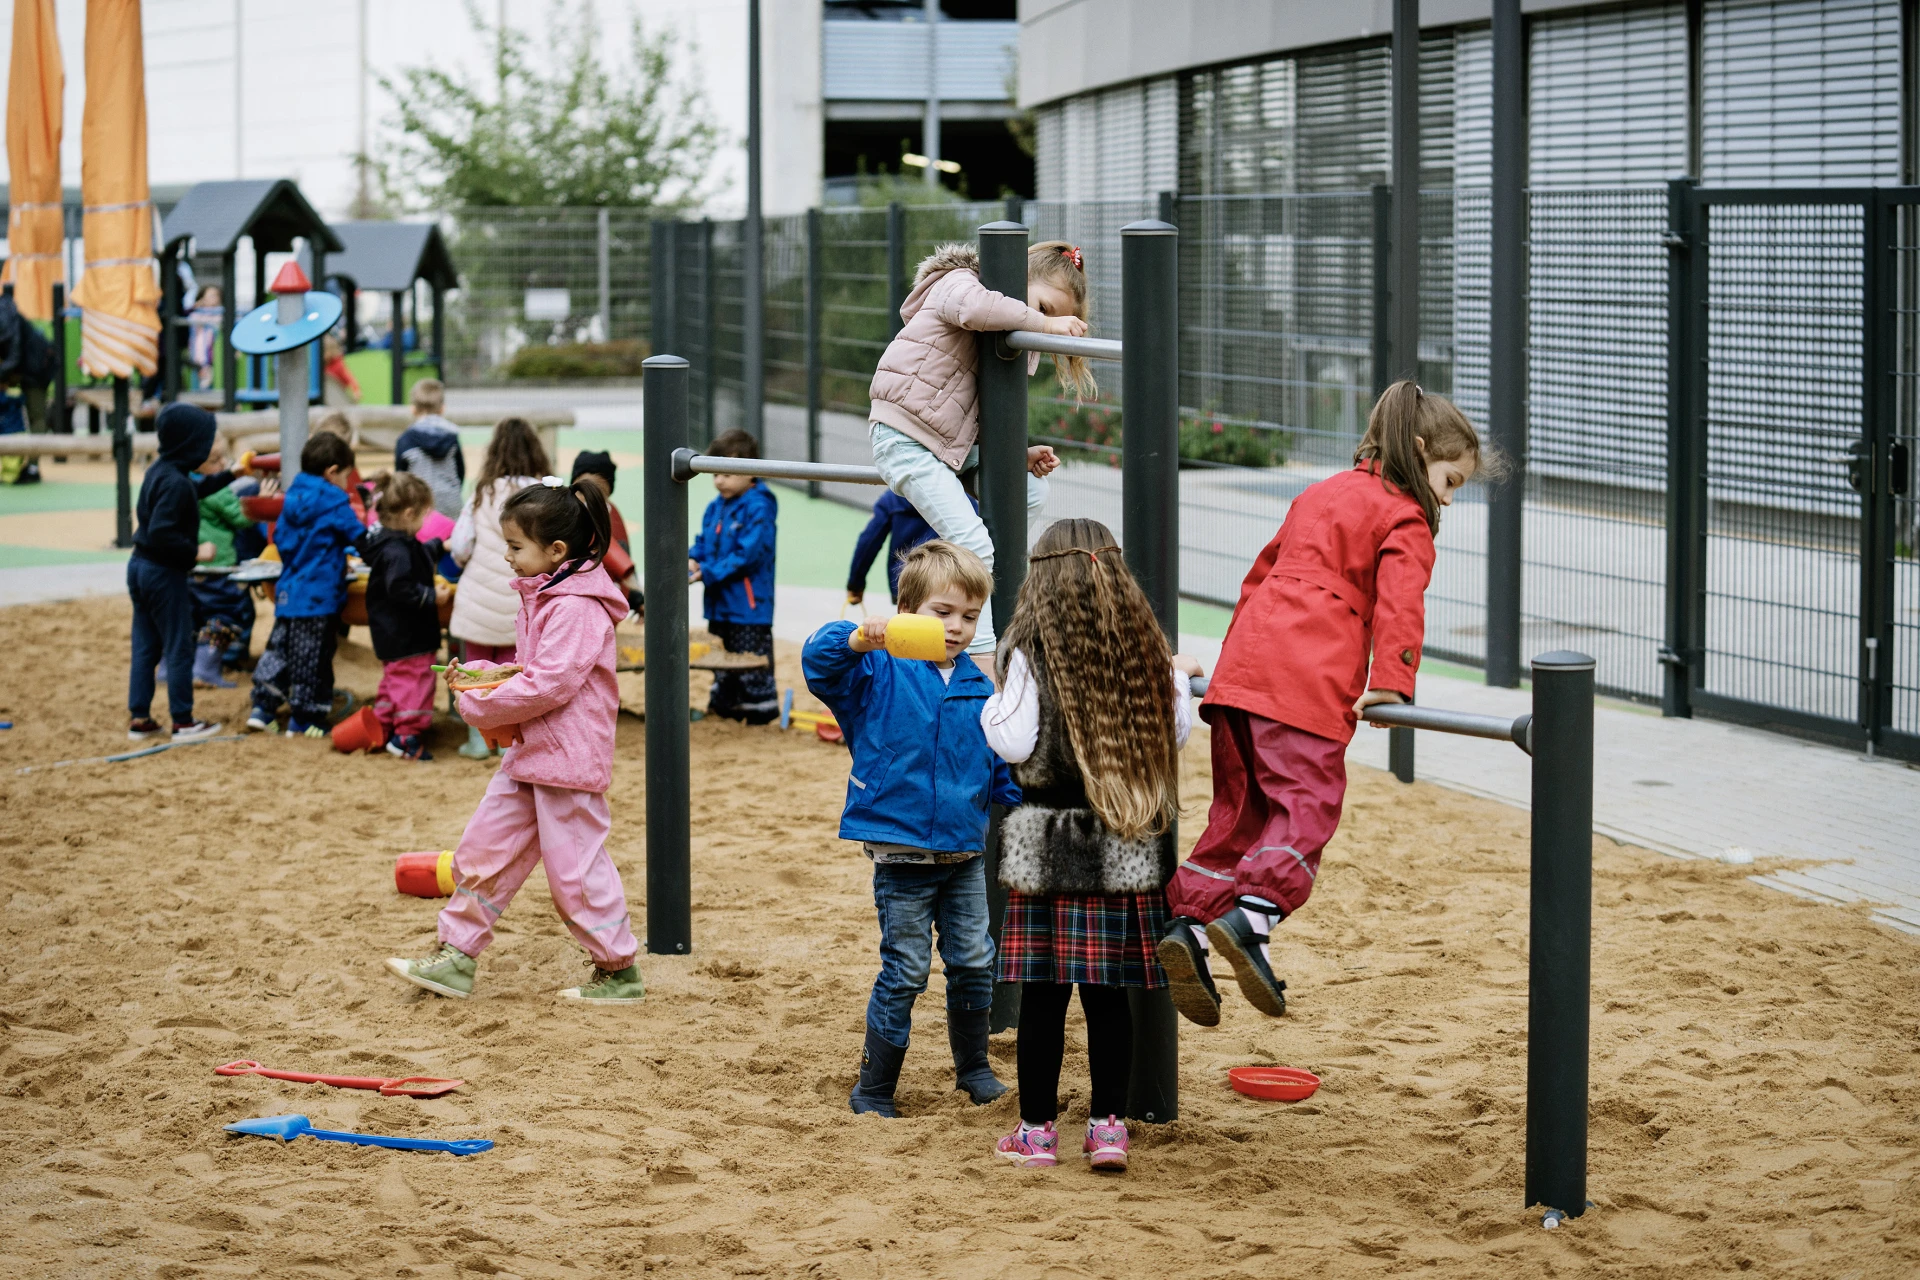 Kindergarten children playing outside on playground in germany